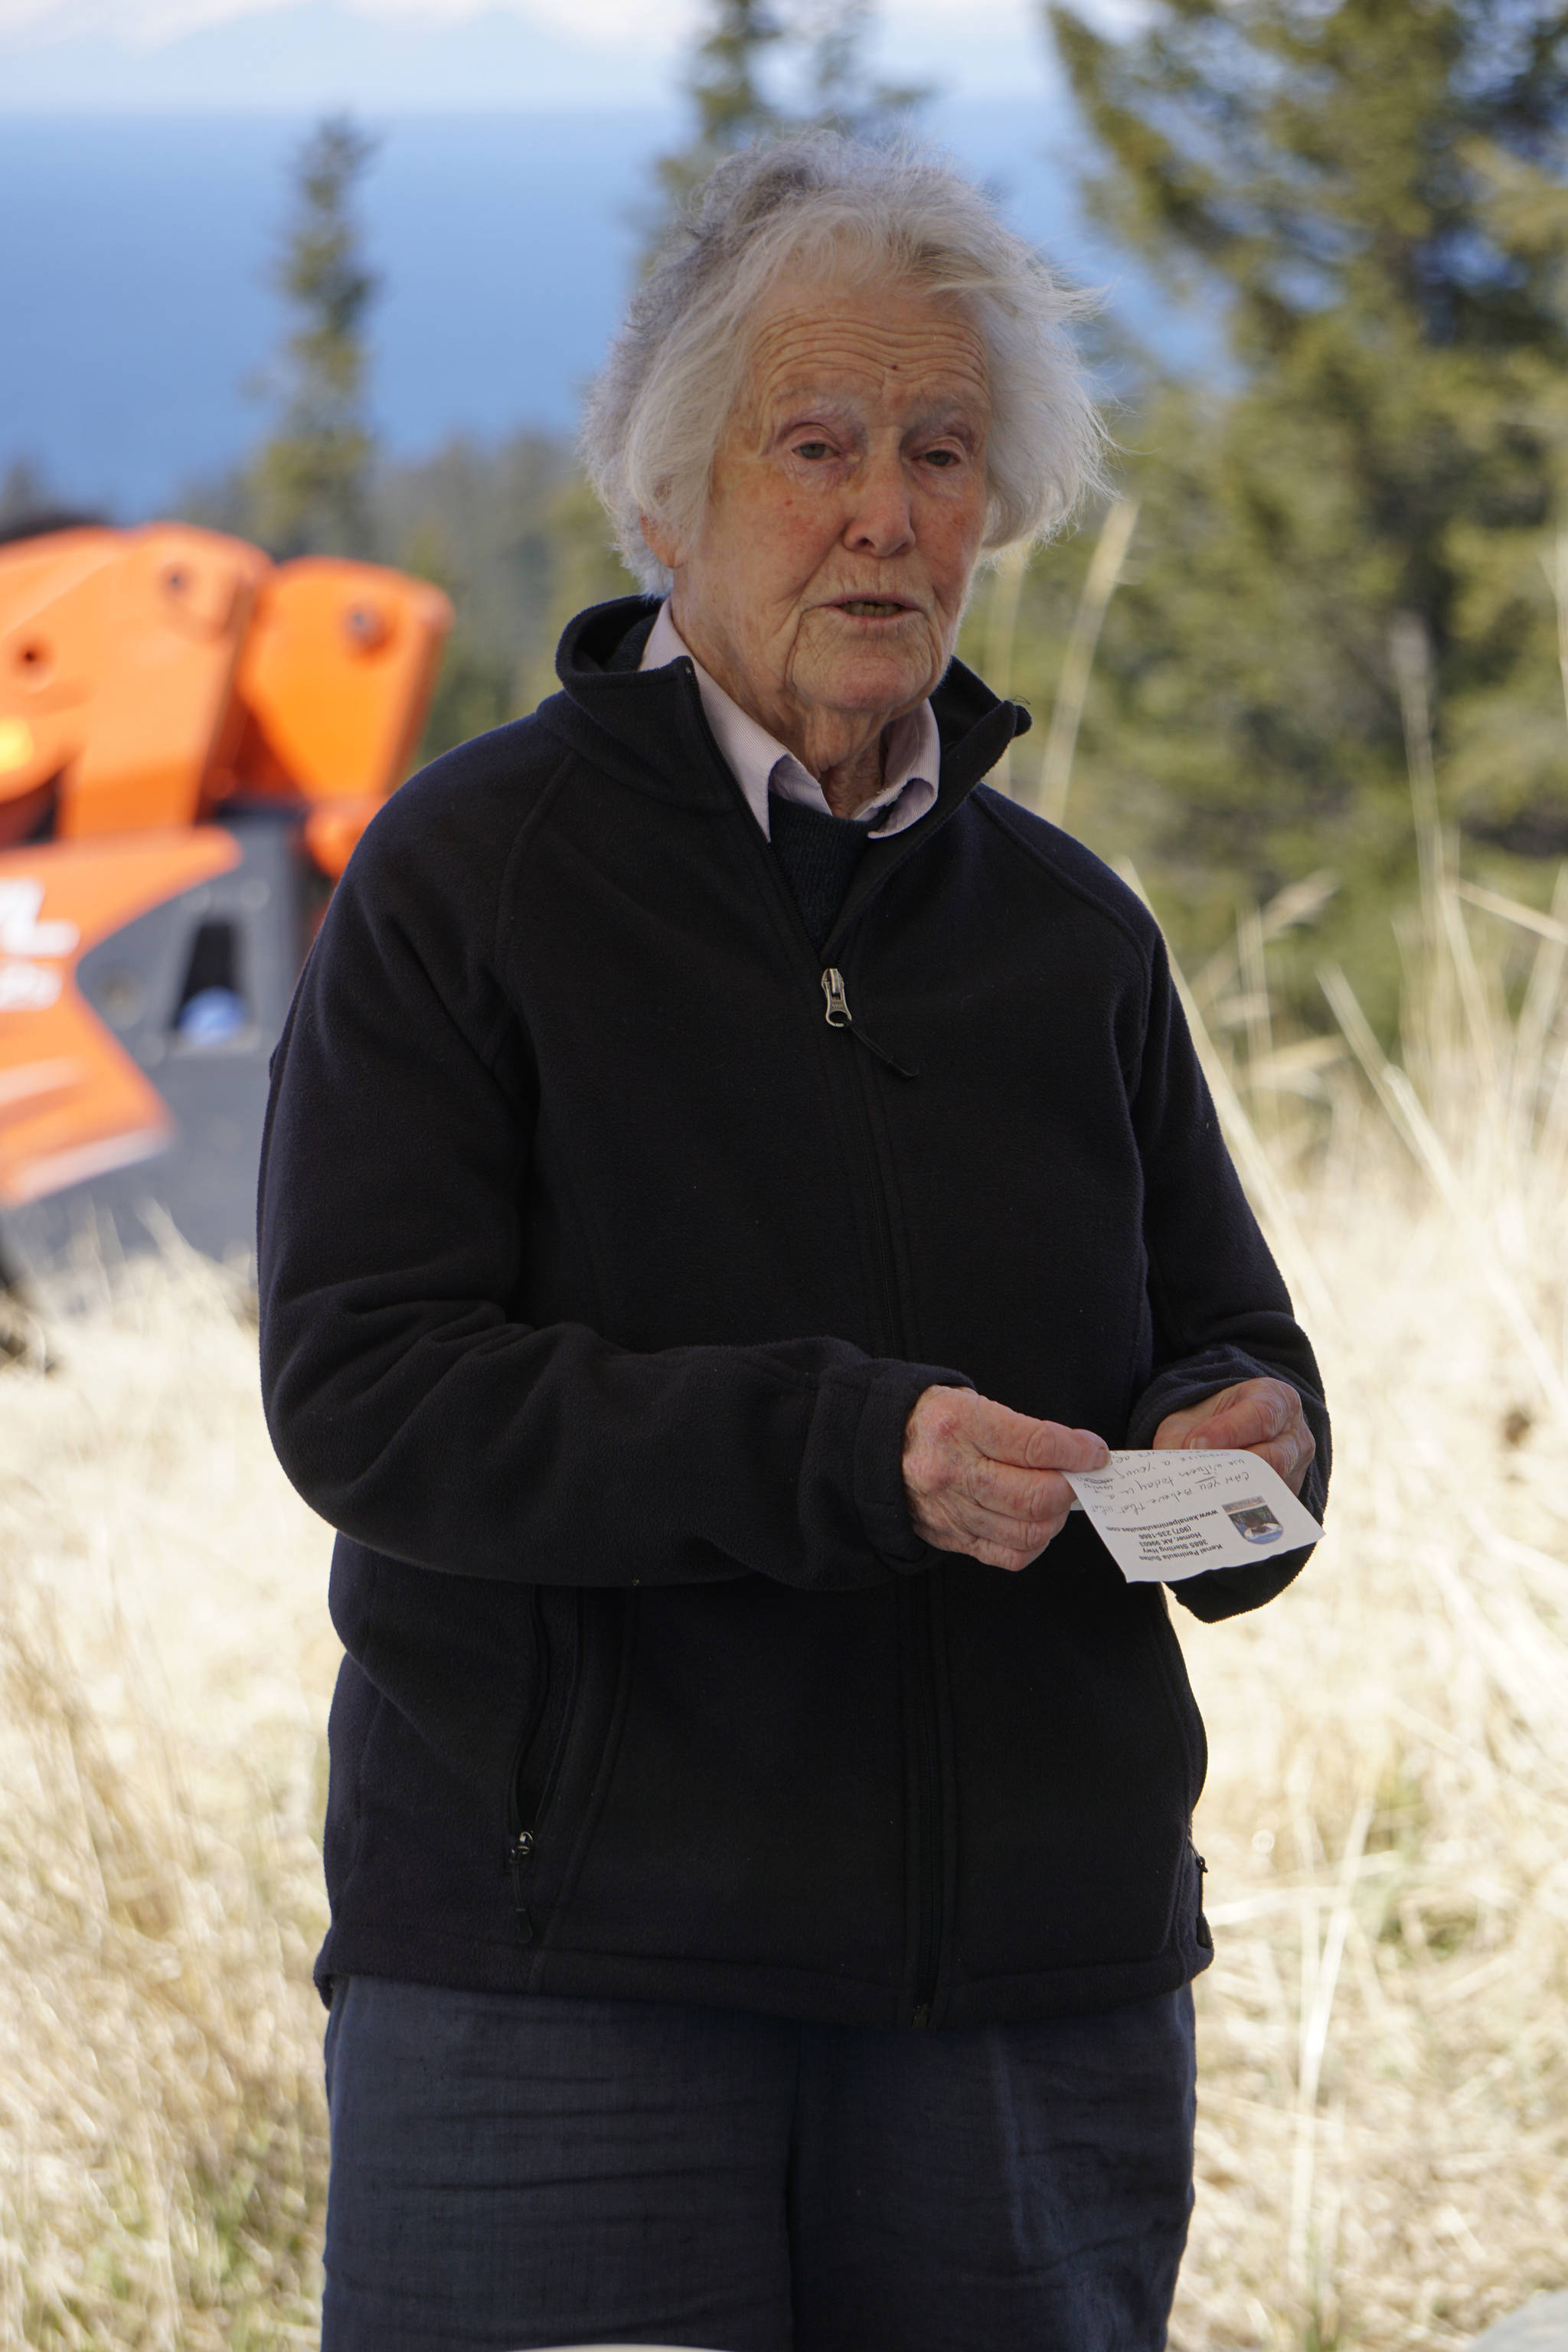 Nancy Skinner Nordhoff speaks at groundbreaking ceremonies for the Storyknife Writers Retreat last Saturday, May 4, 2019, at the retreat property in Homer, Alaska. Nordhoff founded Hedgebrook, Whidbey Island, Washington, the first women’s writer retreat in the United States, that was the model for Storyknife. Storyknife founder Dana Stabenow attended Hedgebrook 30 years ago.Construction started this month on the main house and cabins that will in a year house visiting women writers. (Photo by Michael Armstrong/Homer News)